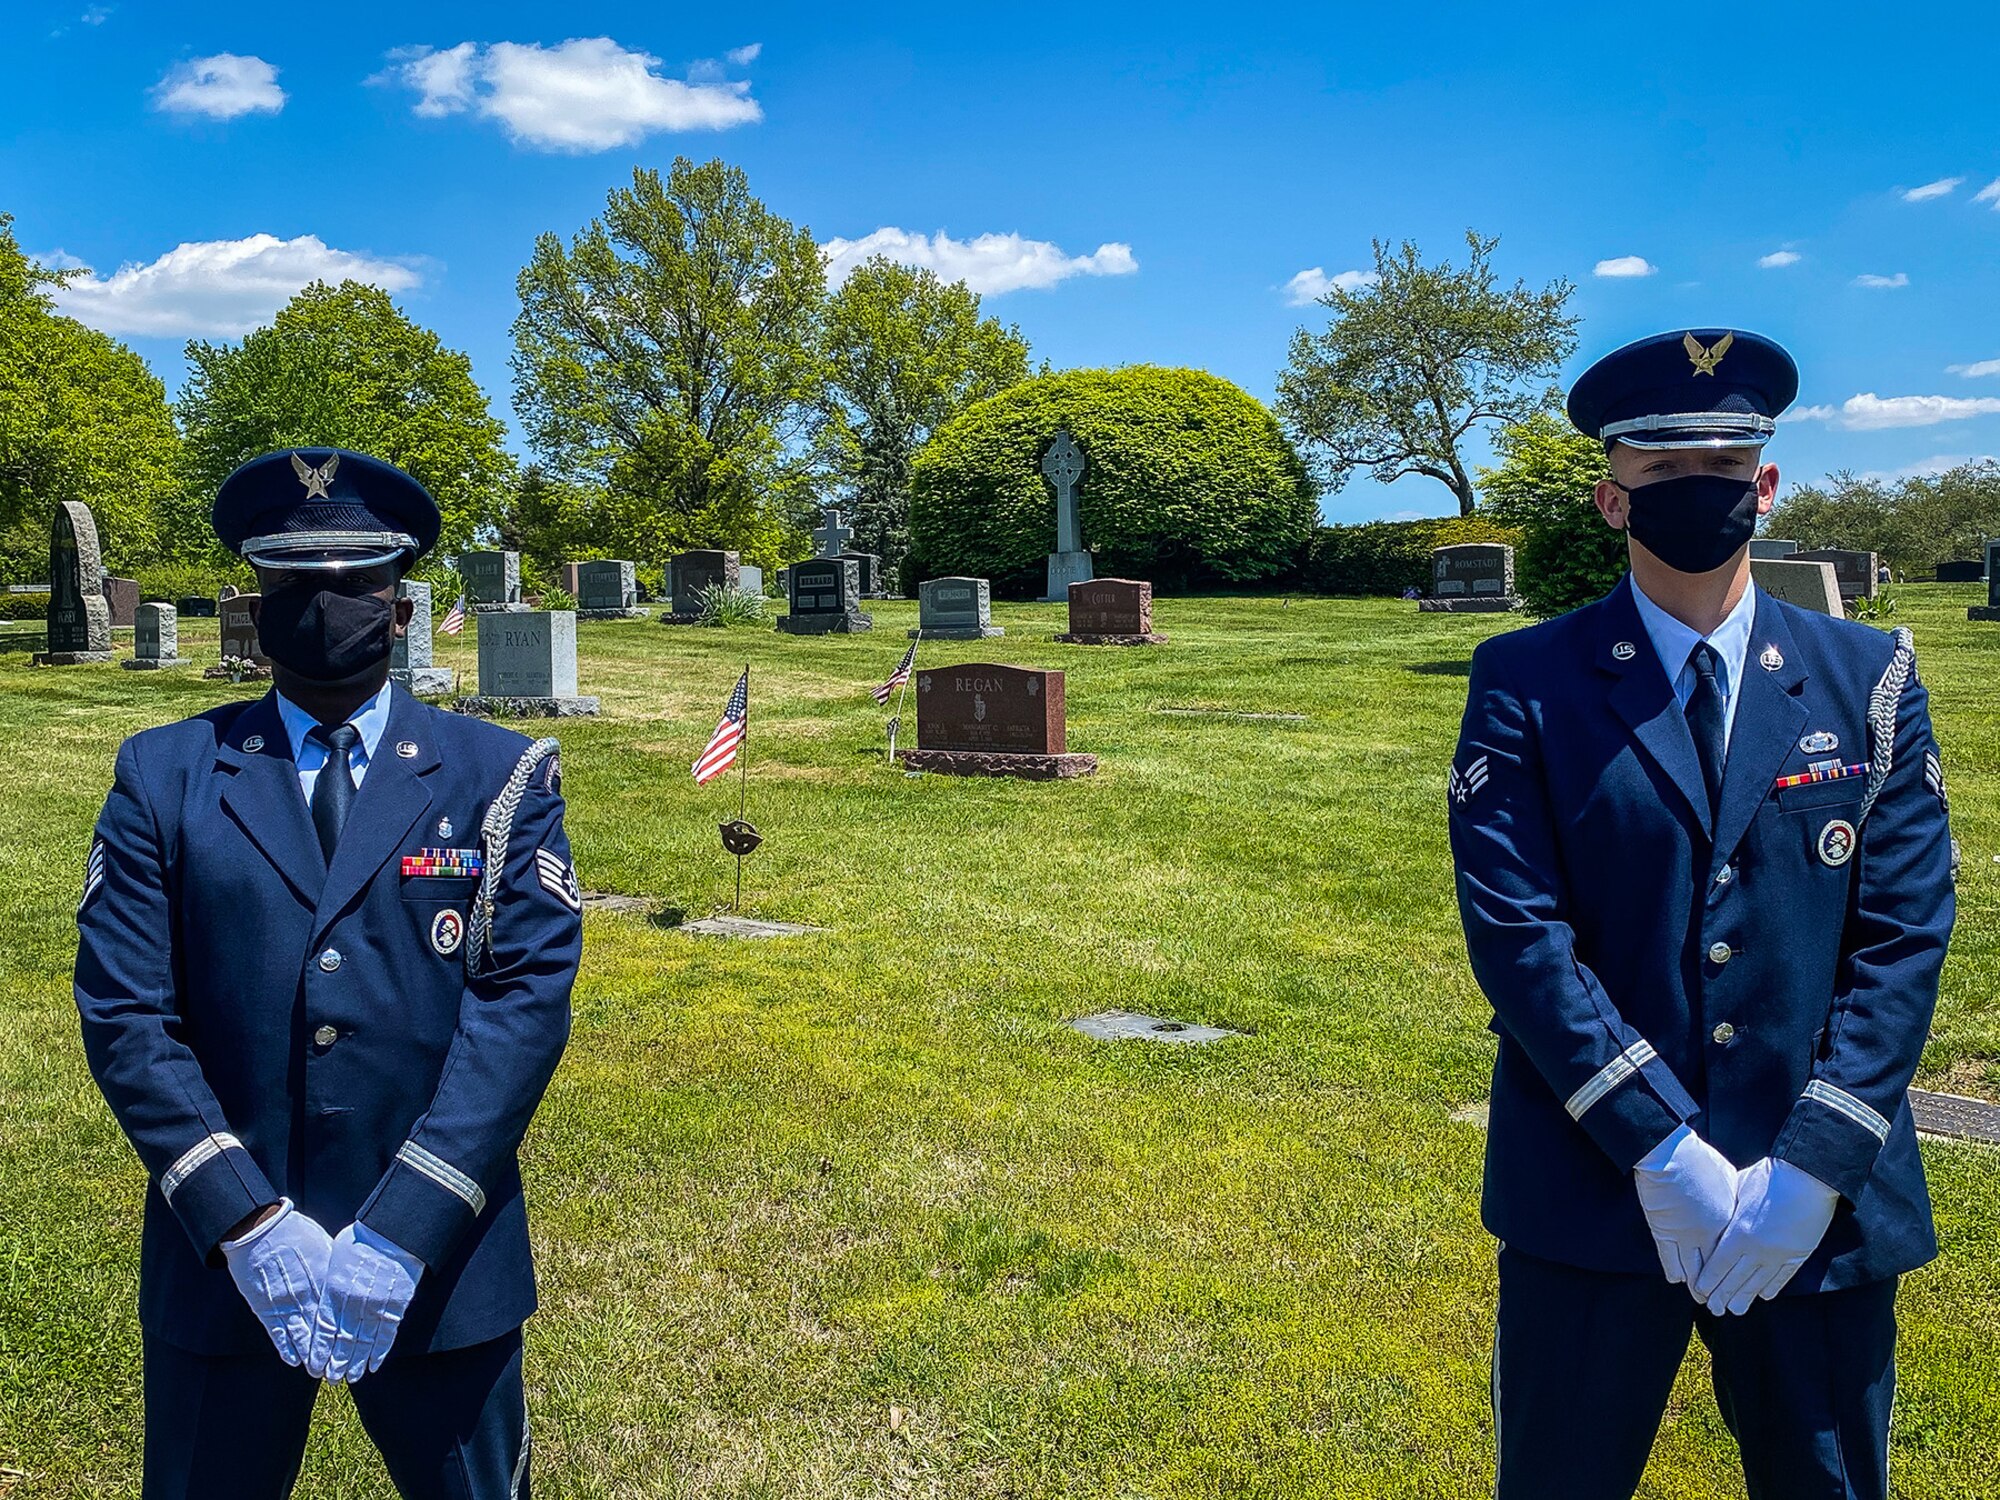 Wright-Patterson Air Force Base Honor Guard members Staff Sgt. Sean Chapman, left, and Senior Airman Rodney Petrie honor the life of Hilton Carter, a Tuskegee Airman, May 13 at St. Joseph Cemetery just south of Columbus along Route 23, not far from Rickenbacker Airport, Columbus. (Contributed photo)